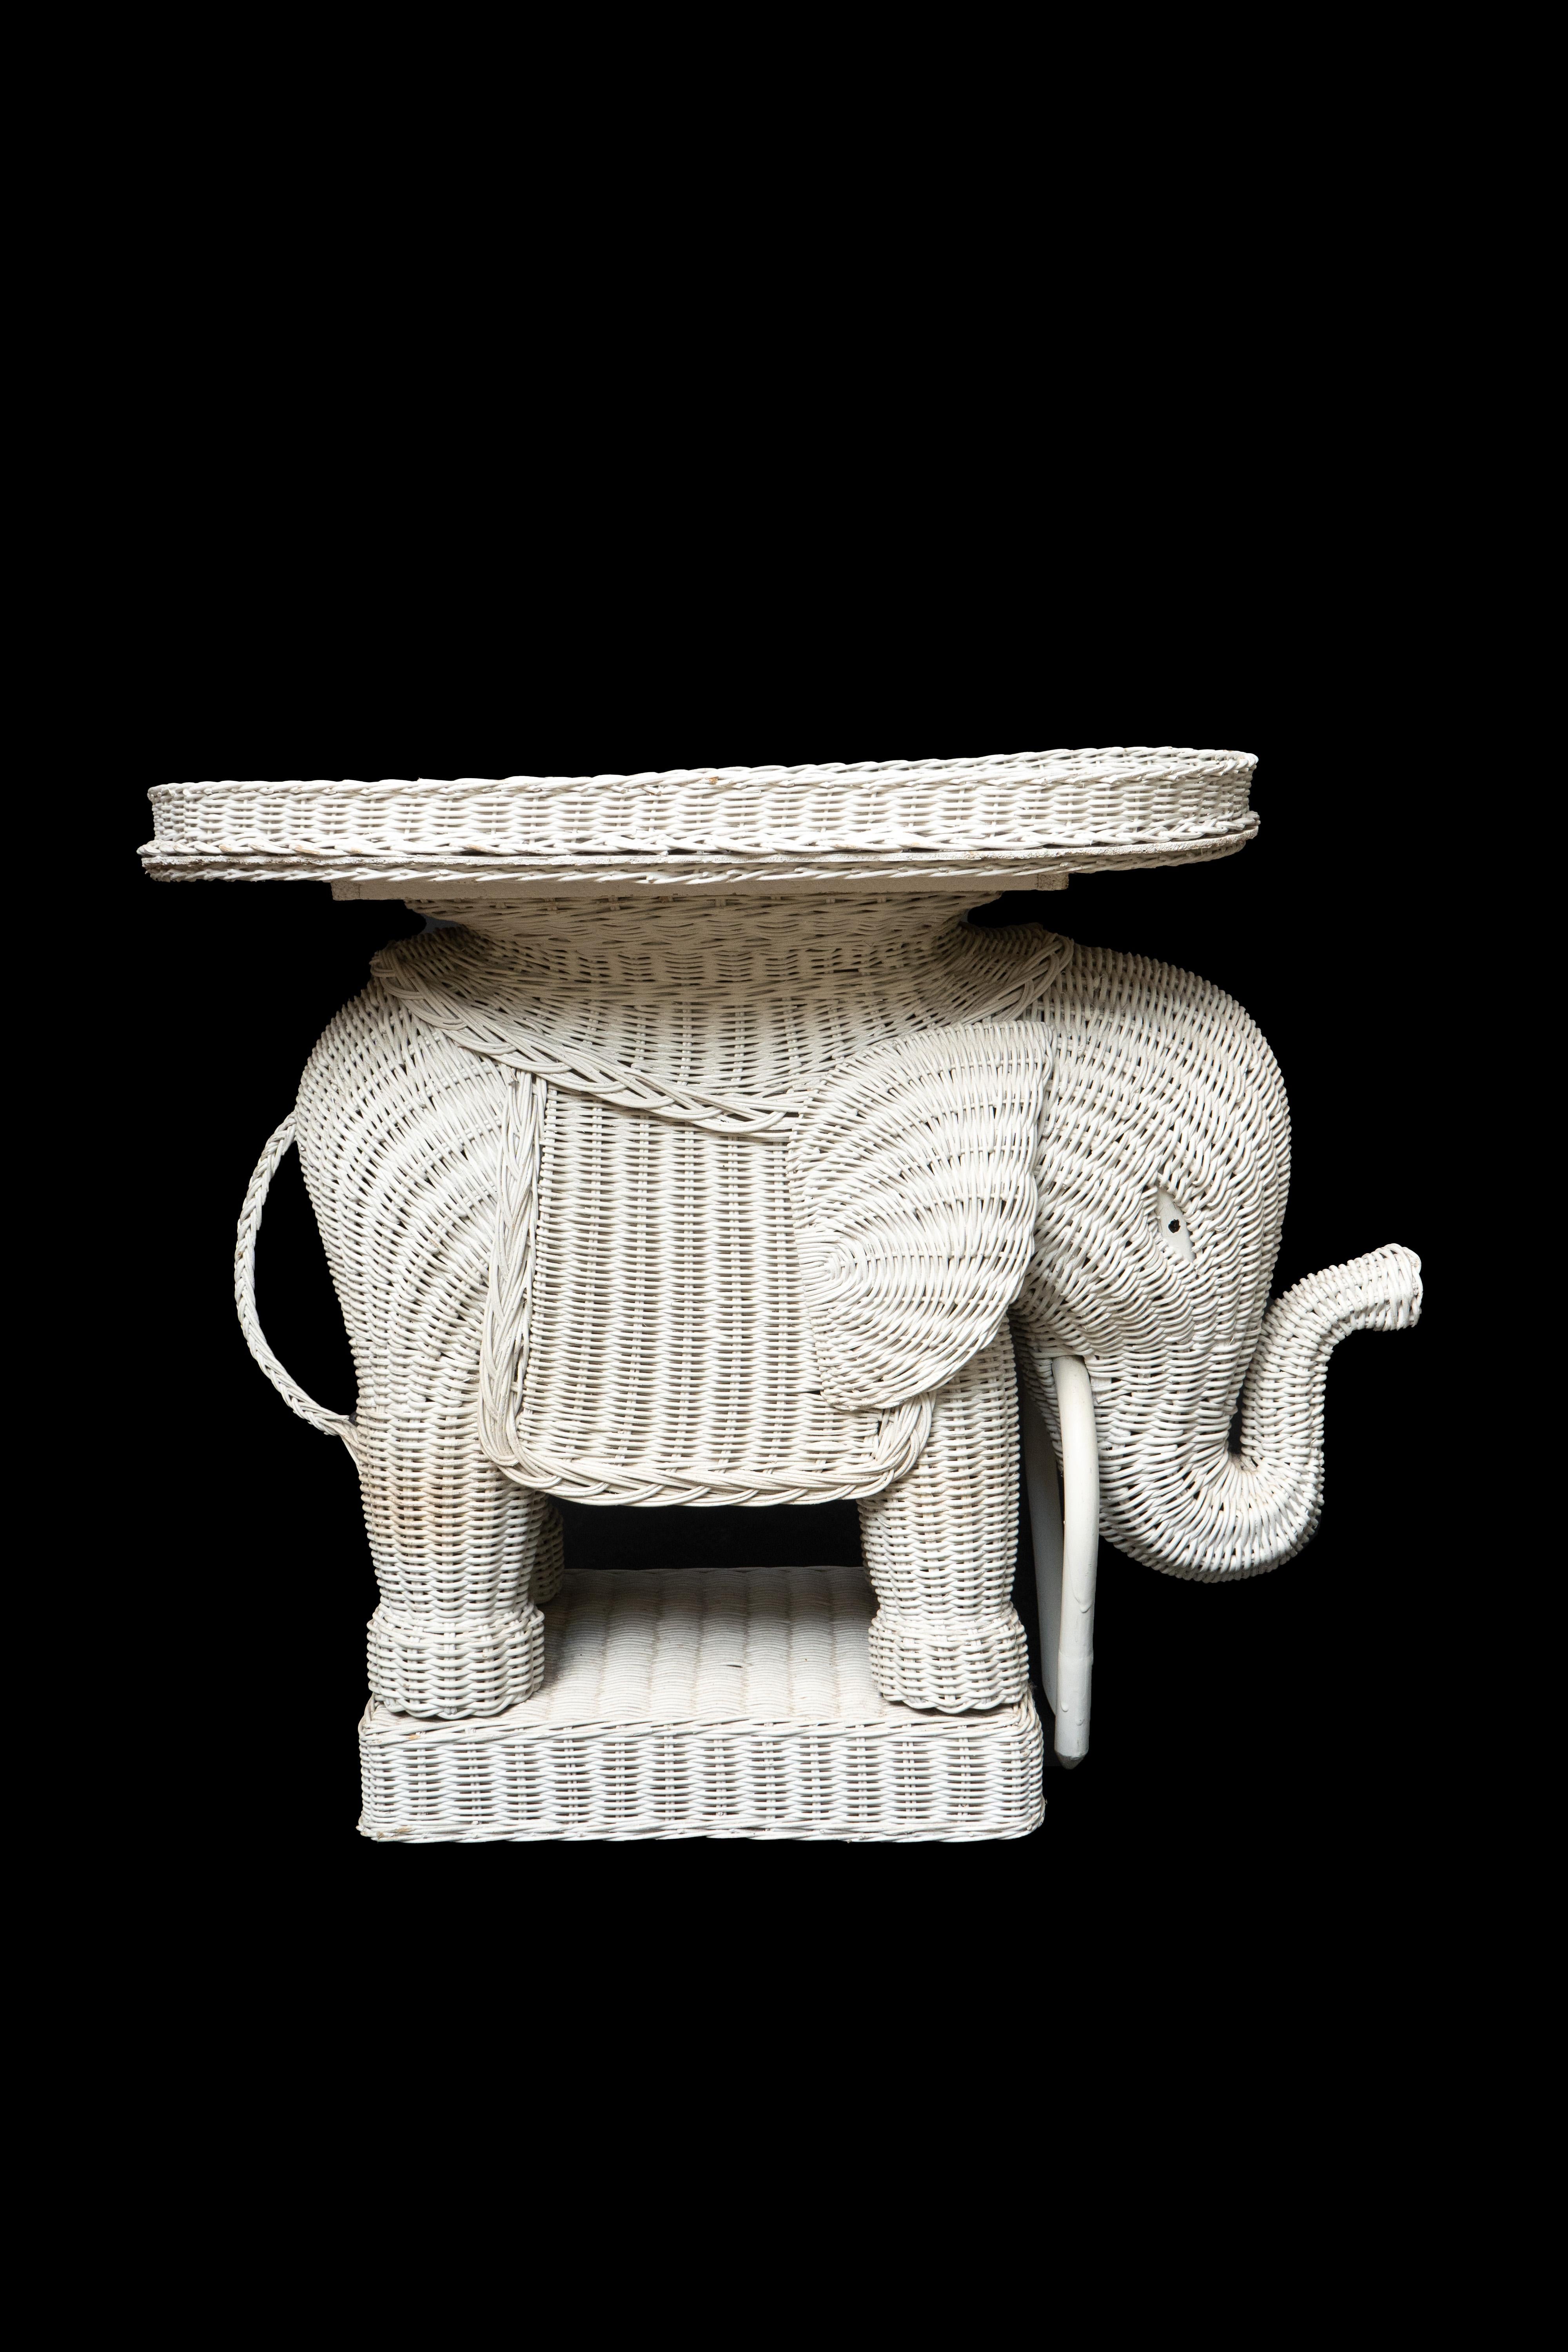 Wicker elephant side table with removable tray:

Measures: 28